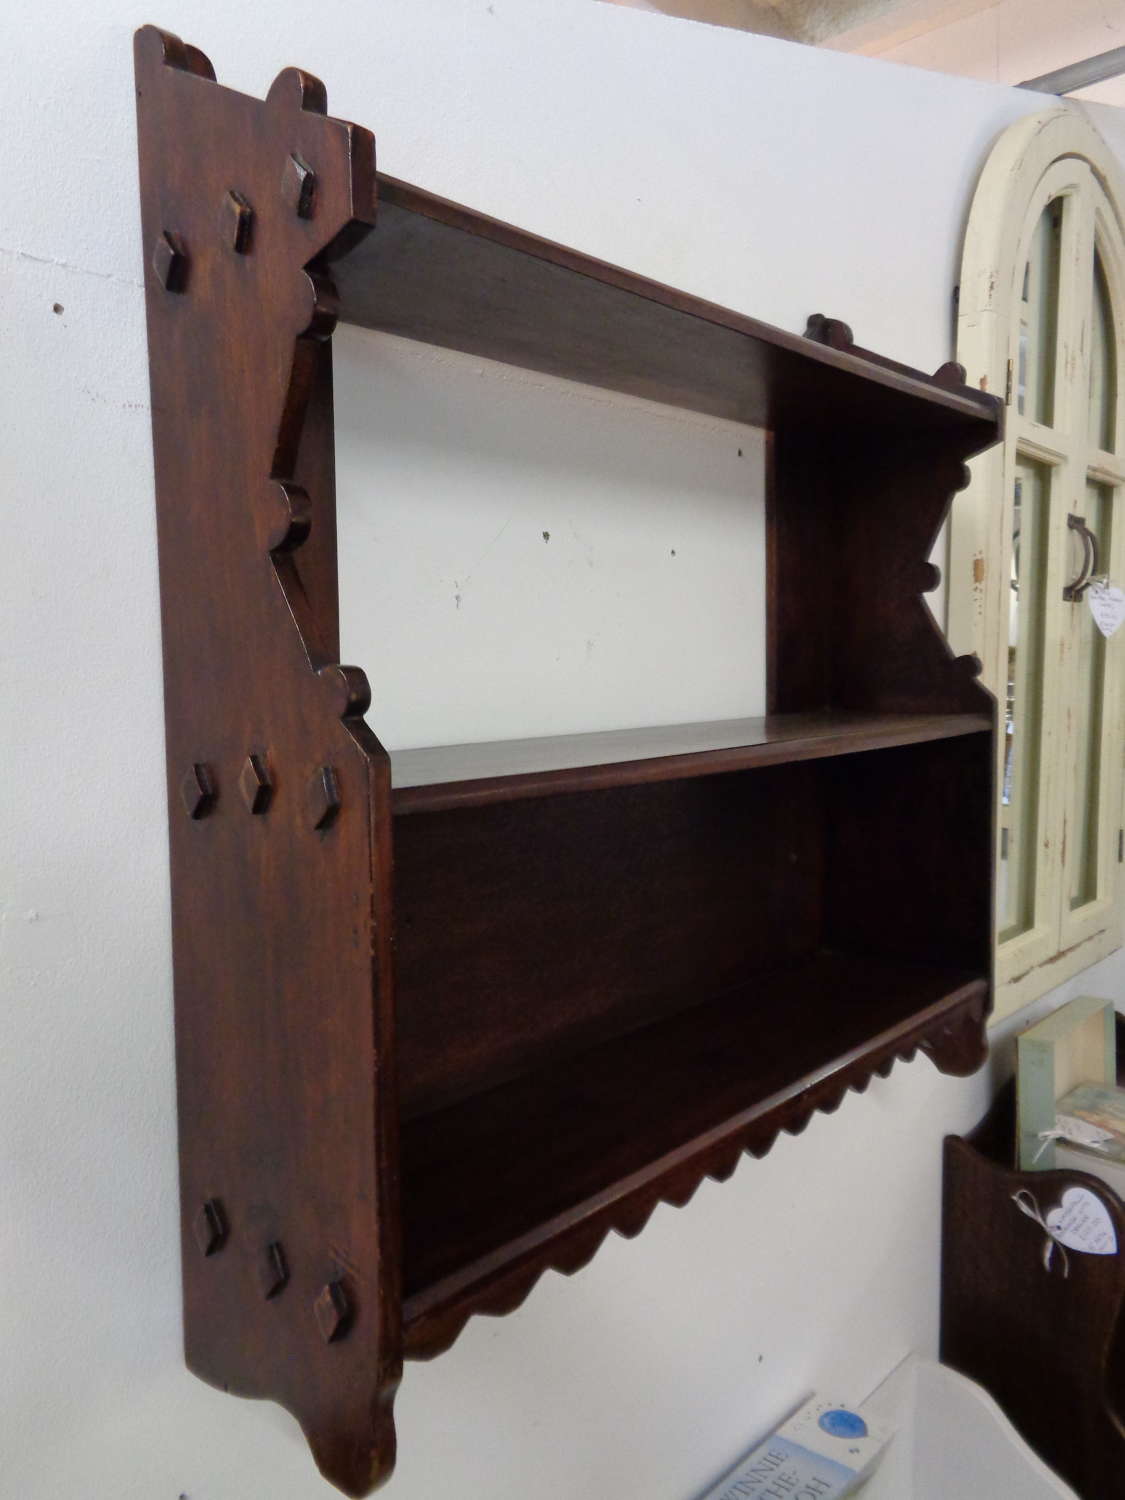 Antique Mahogany Book Shelves - Free Standing or Wall Mounted